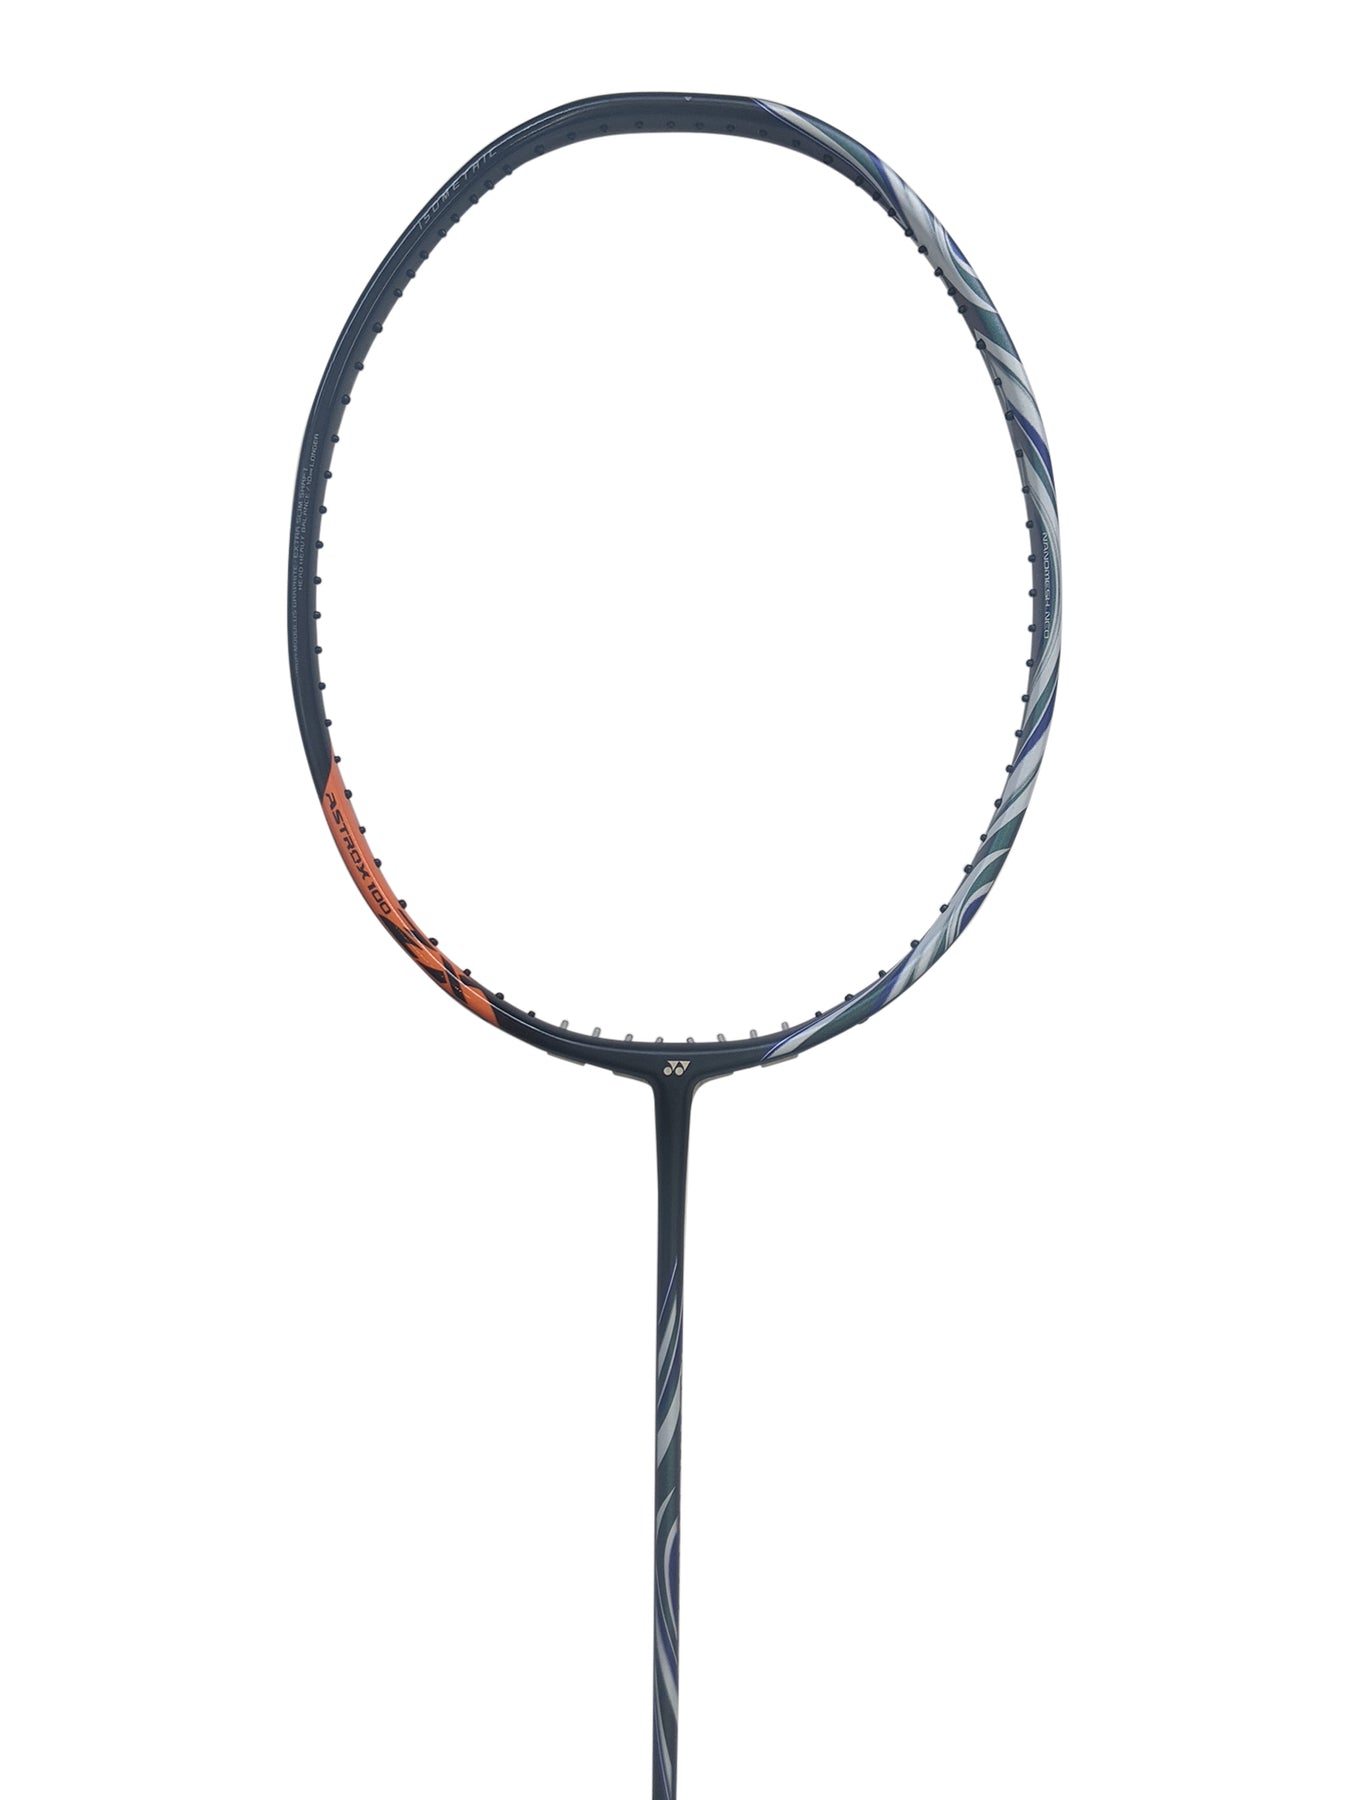 Advanced Badminton Rackets with free shipping